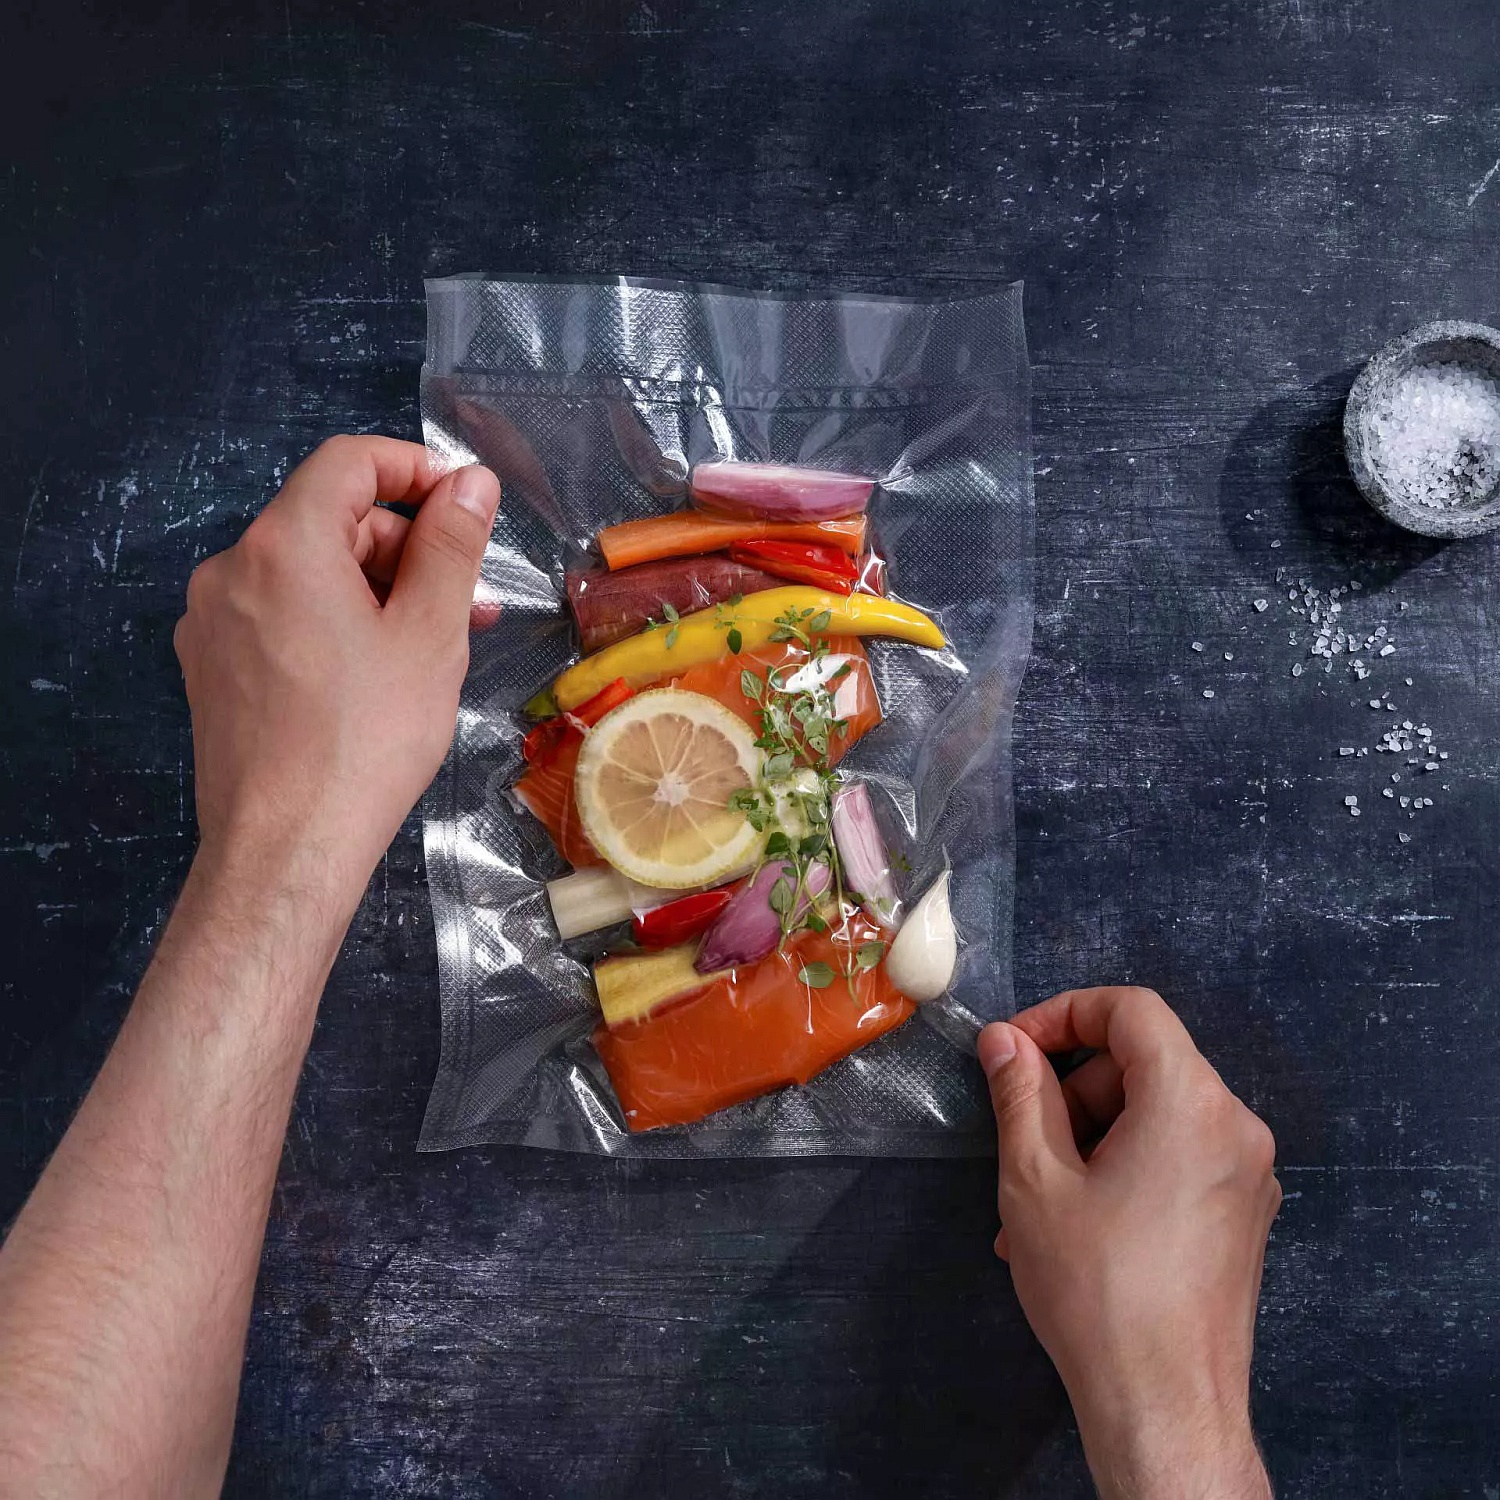 H-Vac vacuum cooking bag with food for sous-vide cooking